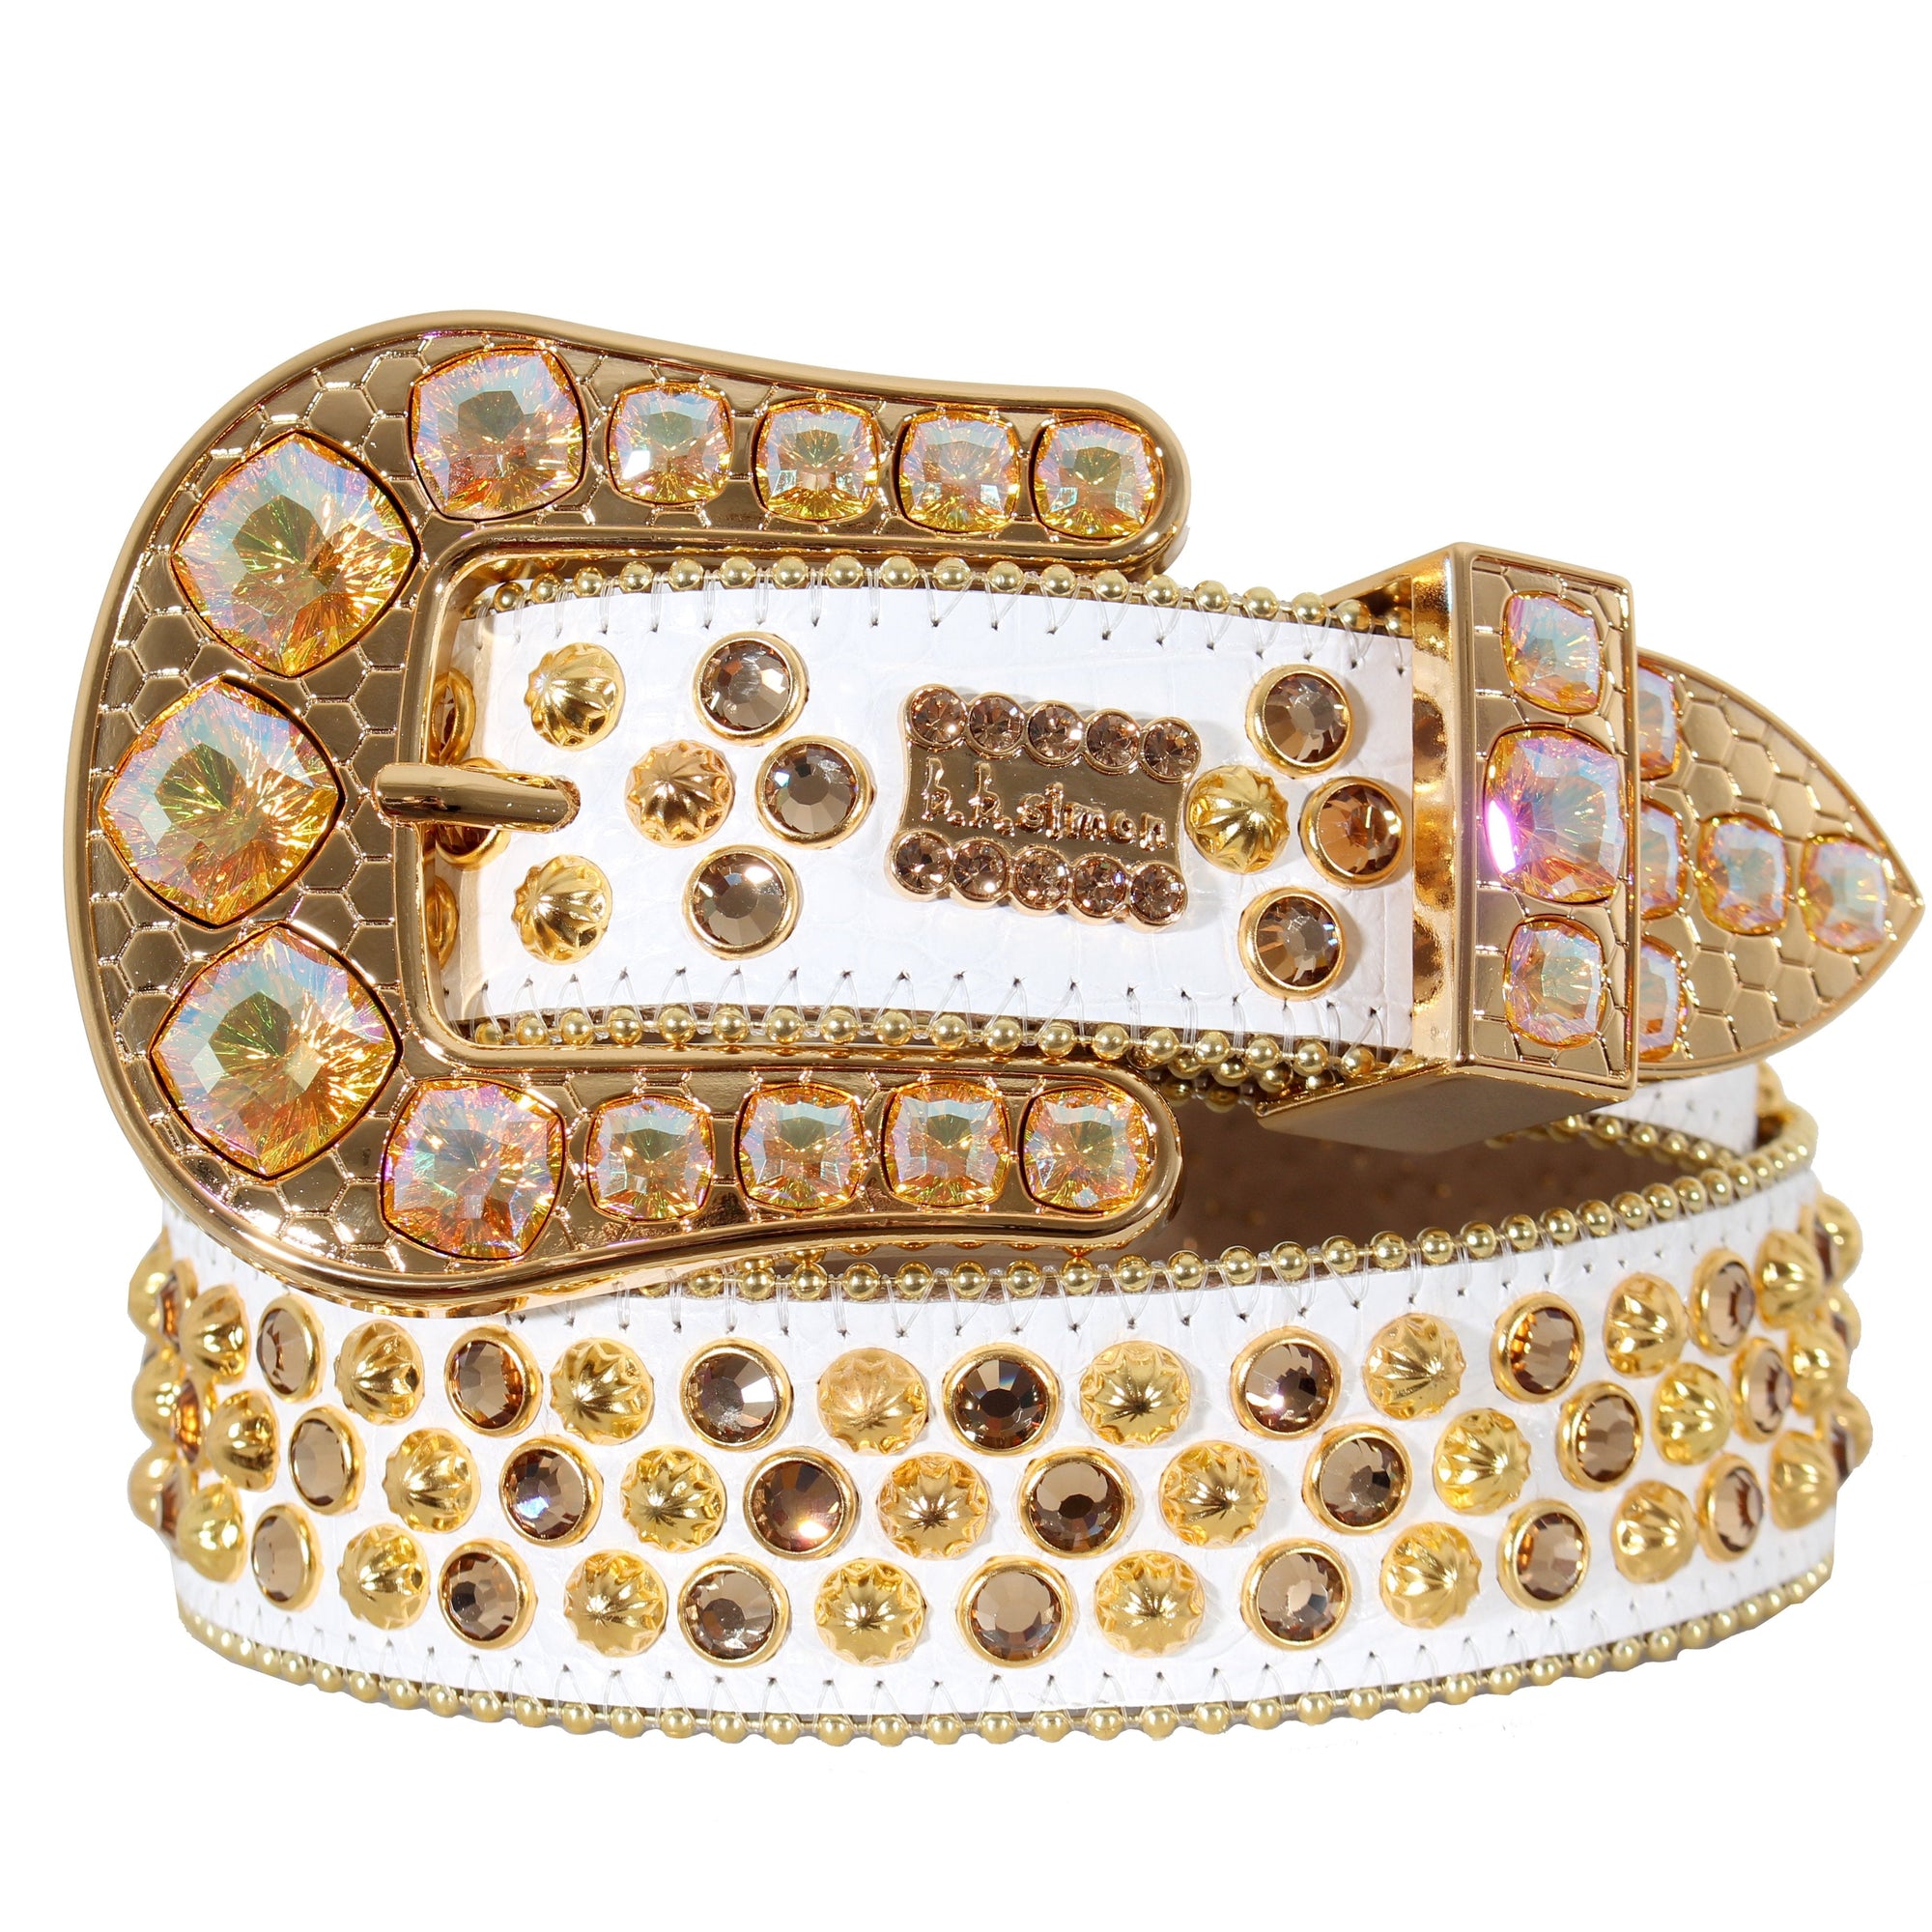 Big crystals white and gold belt